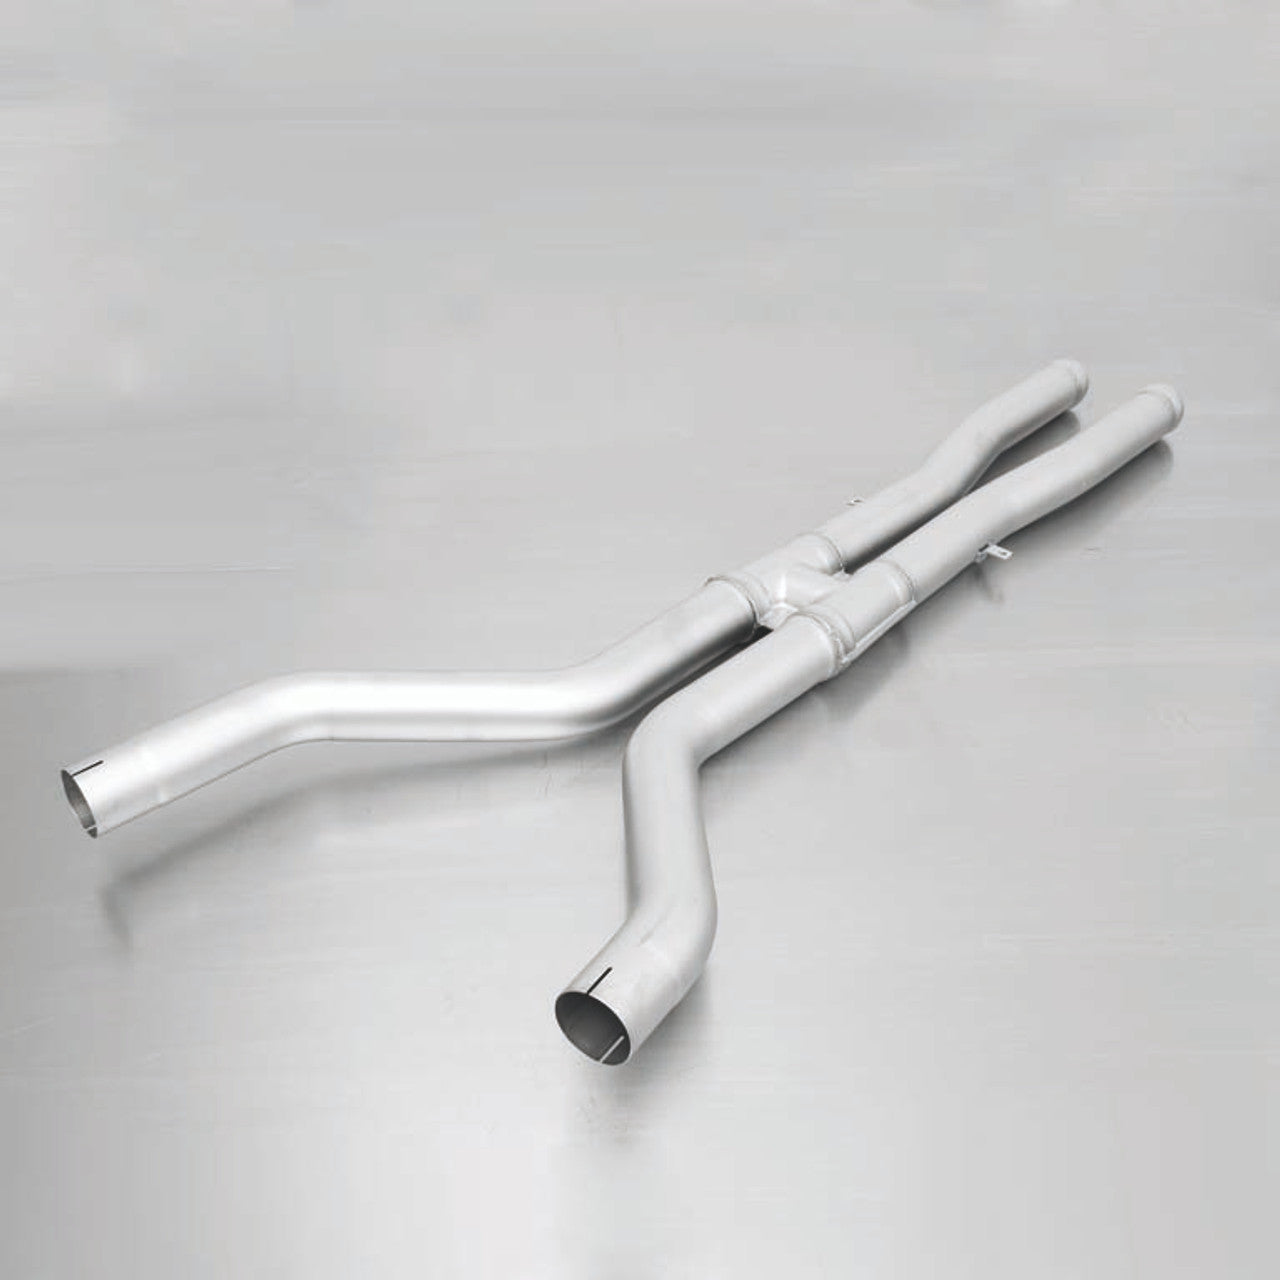 Remus Non-Resonated Cat back System Left/Right with 4 tail pipes @ 84 mm angled, rolled edge, chromed - 3 Series E90/E92/E93 M3 309 kW S65B40A 2007-